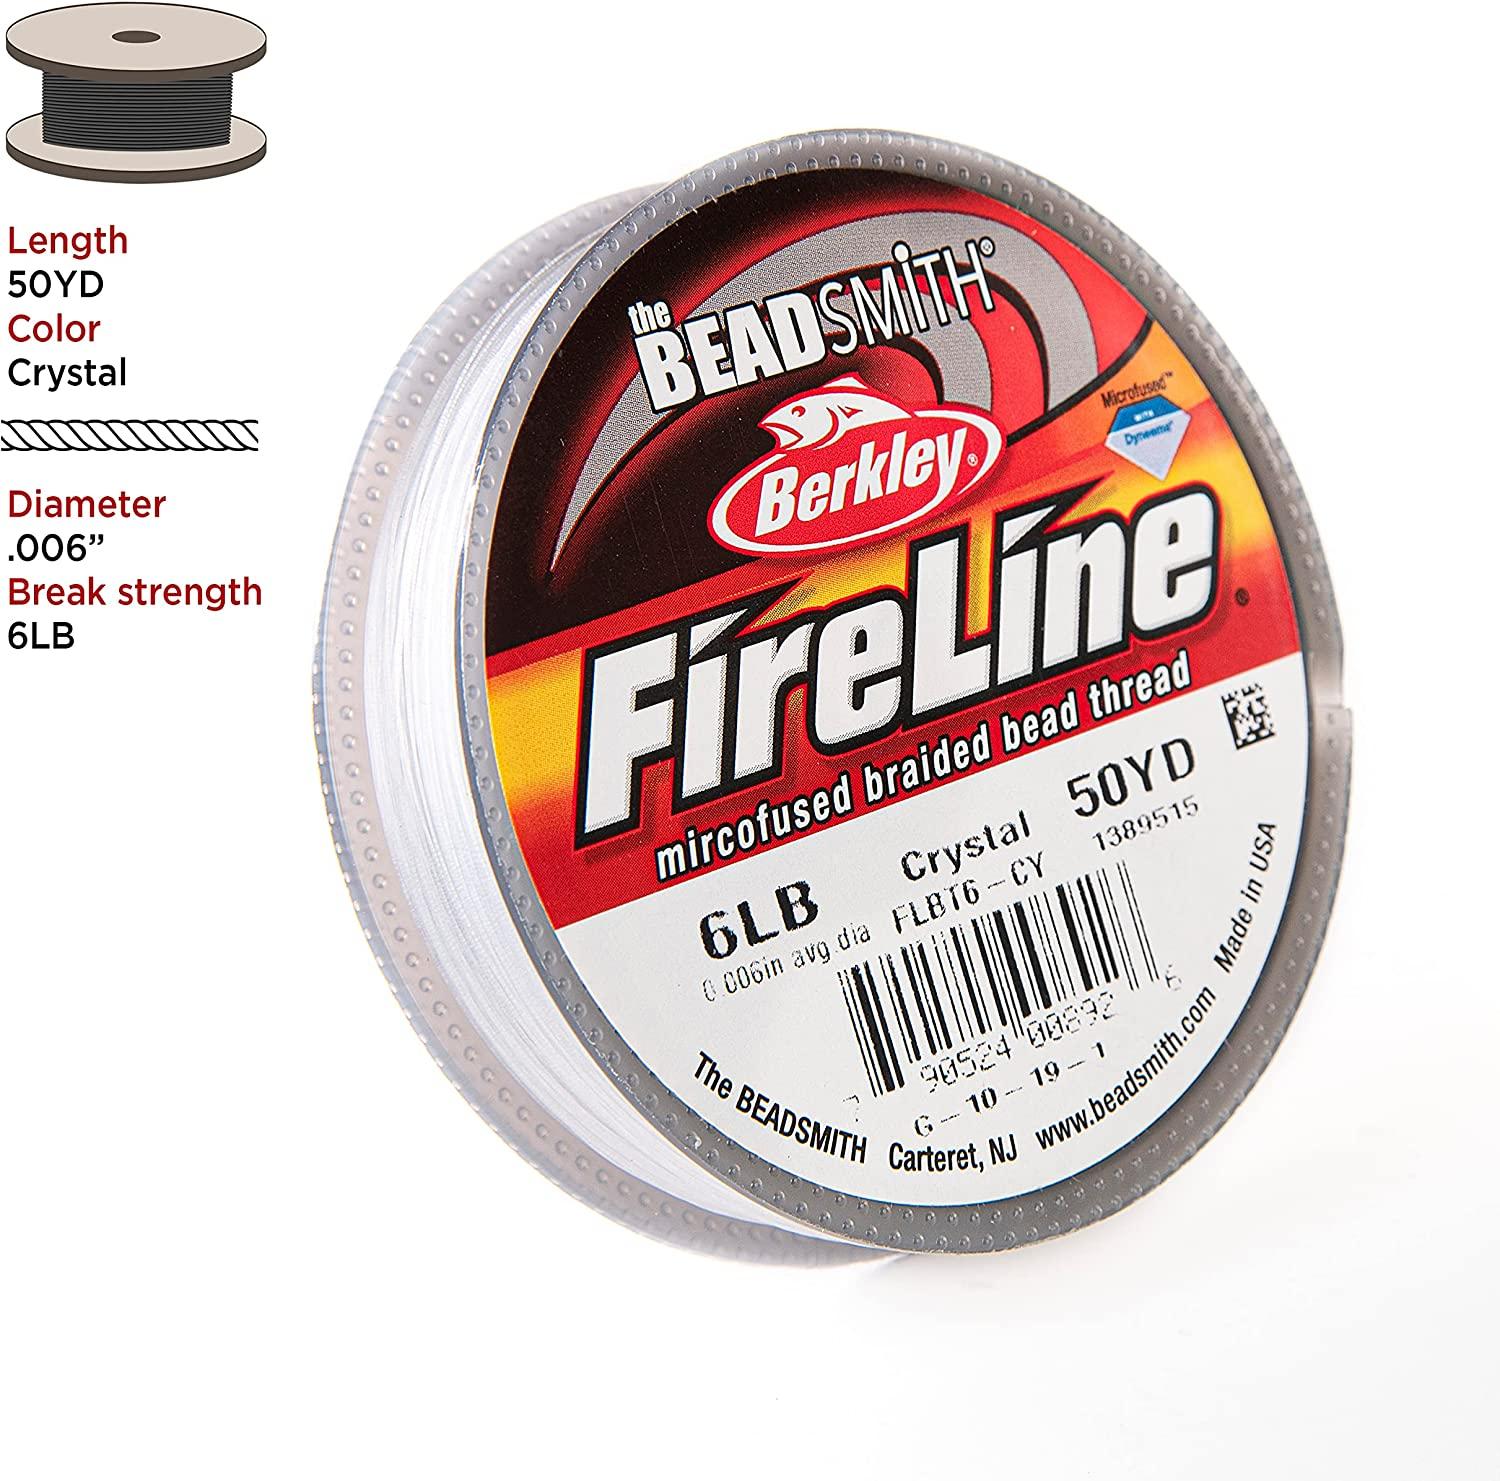 The Beadsmith Fireline by Berkley Micro-Fused Braided Thread 6lb.  Test.006/.15mm Diameter, 50 Yard Spool, Crystal Color Super Strong  Stringing Material for Jewelry Making and Bead Weaving